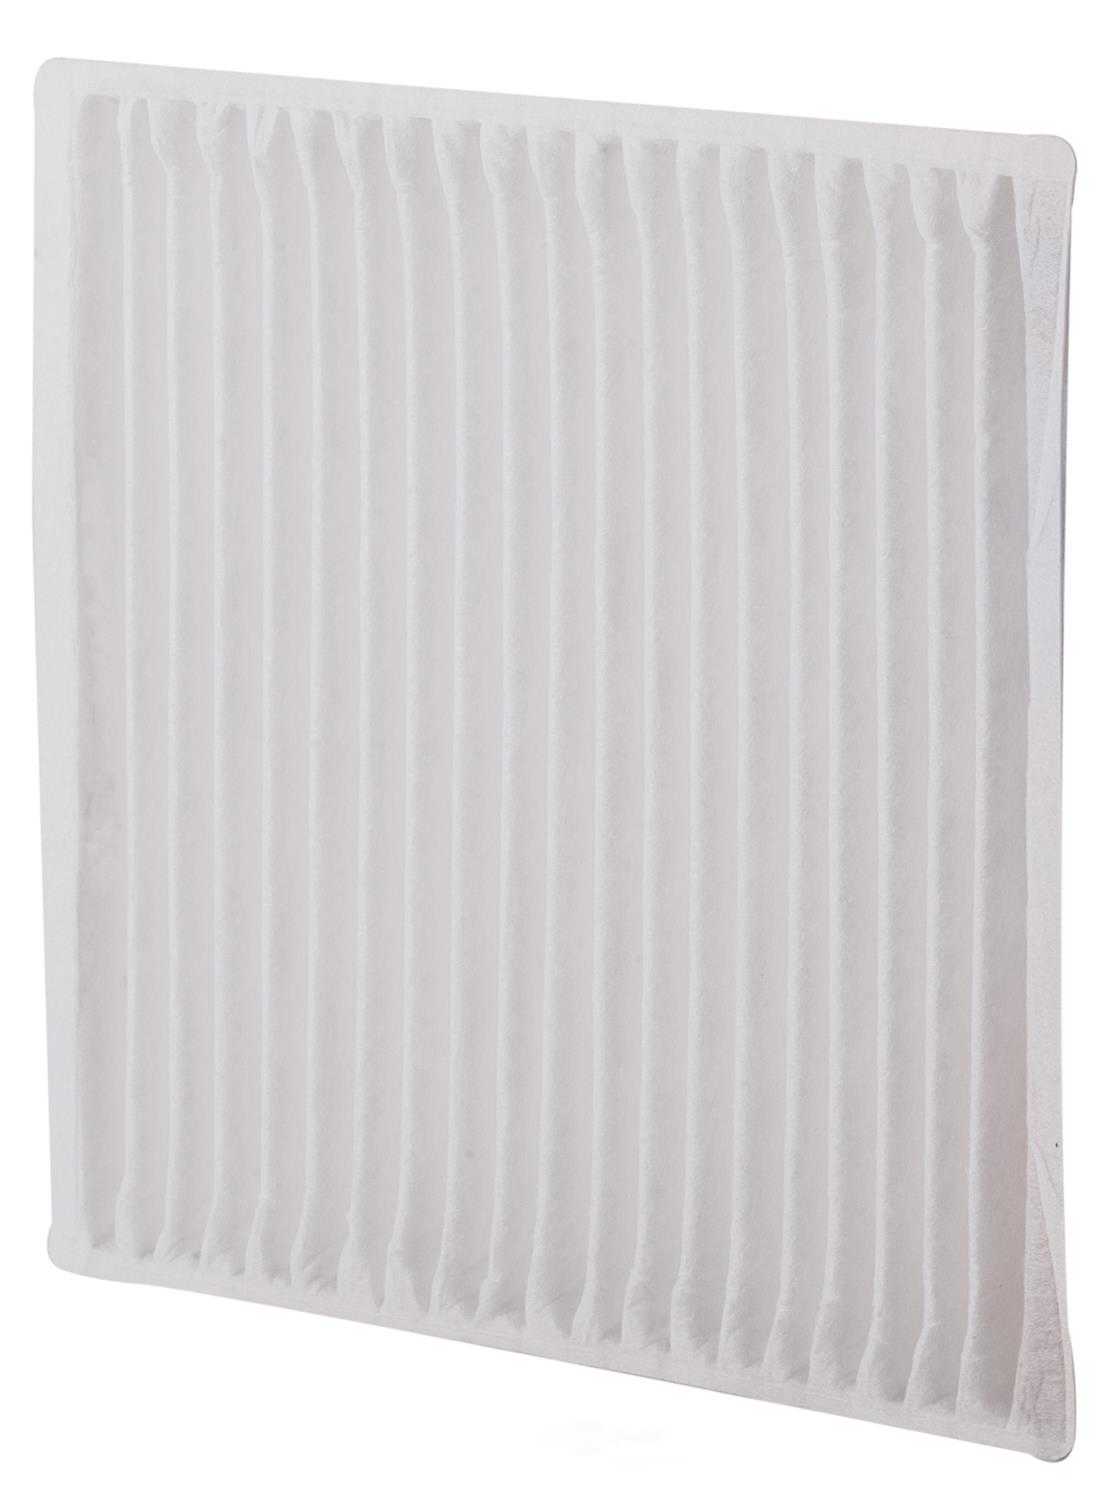 PRONTO/ID USA - Cabin Air Filter - PNP PC5516